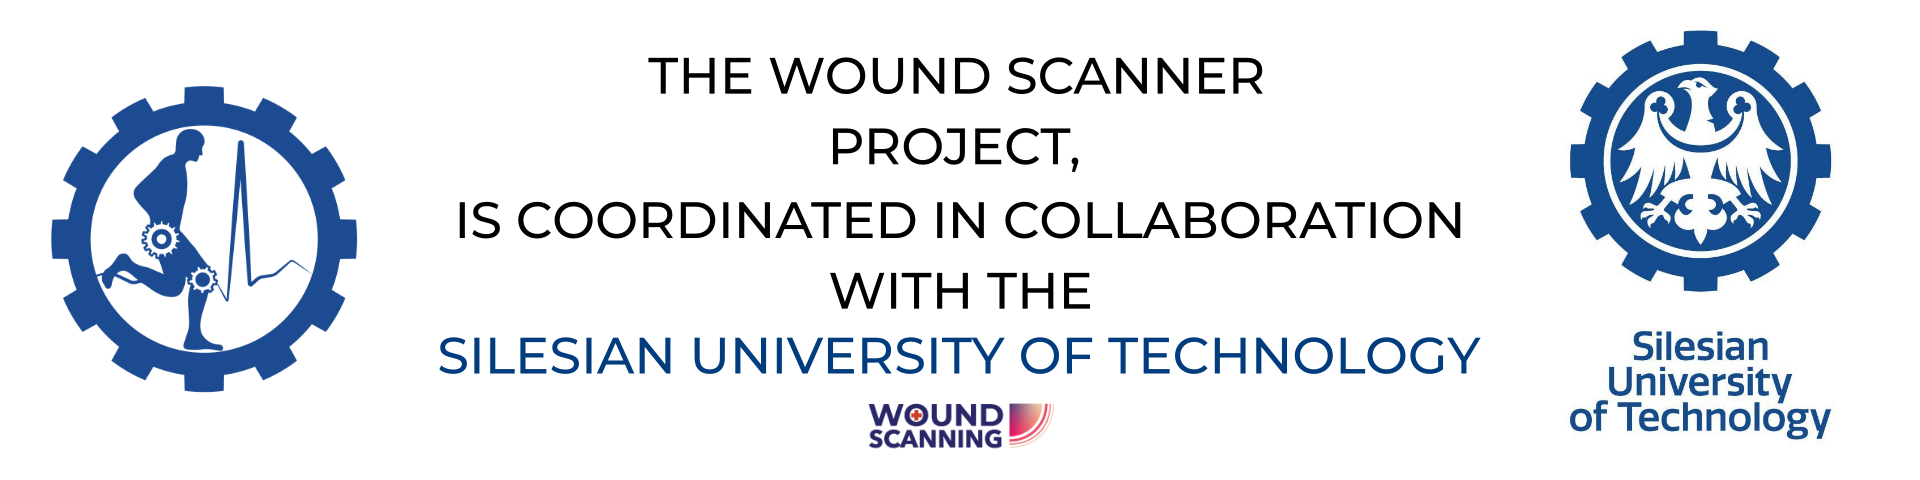 THE WOUND SCANNER PROJECT, IS COORDINATED IN COLLABORATION WITH THE SILESIAN UNIVERSITY OF TECHNOLOGY